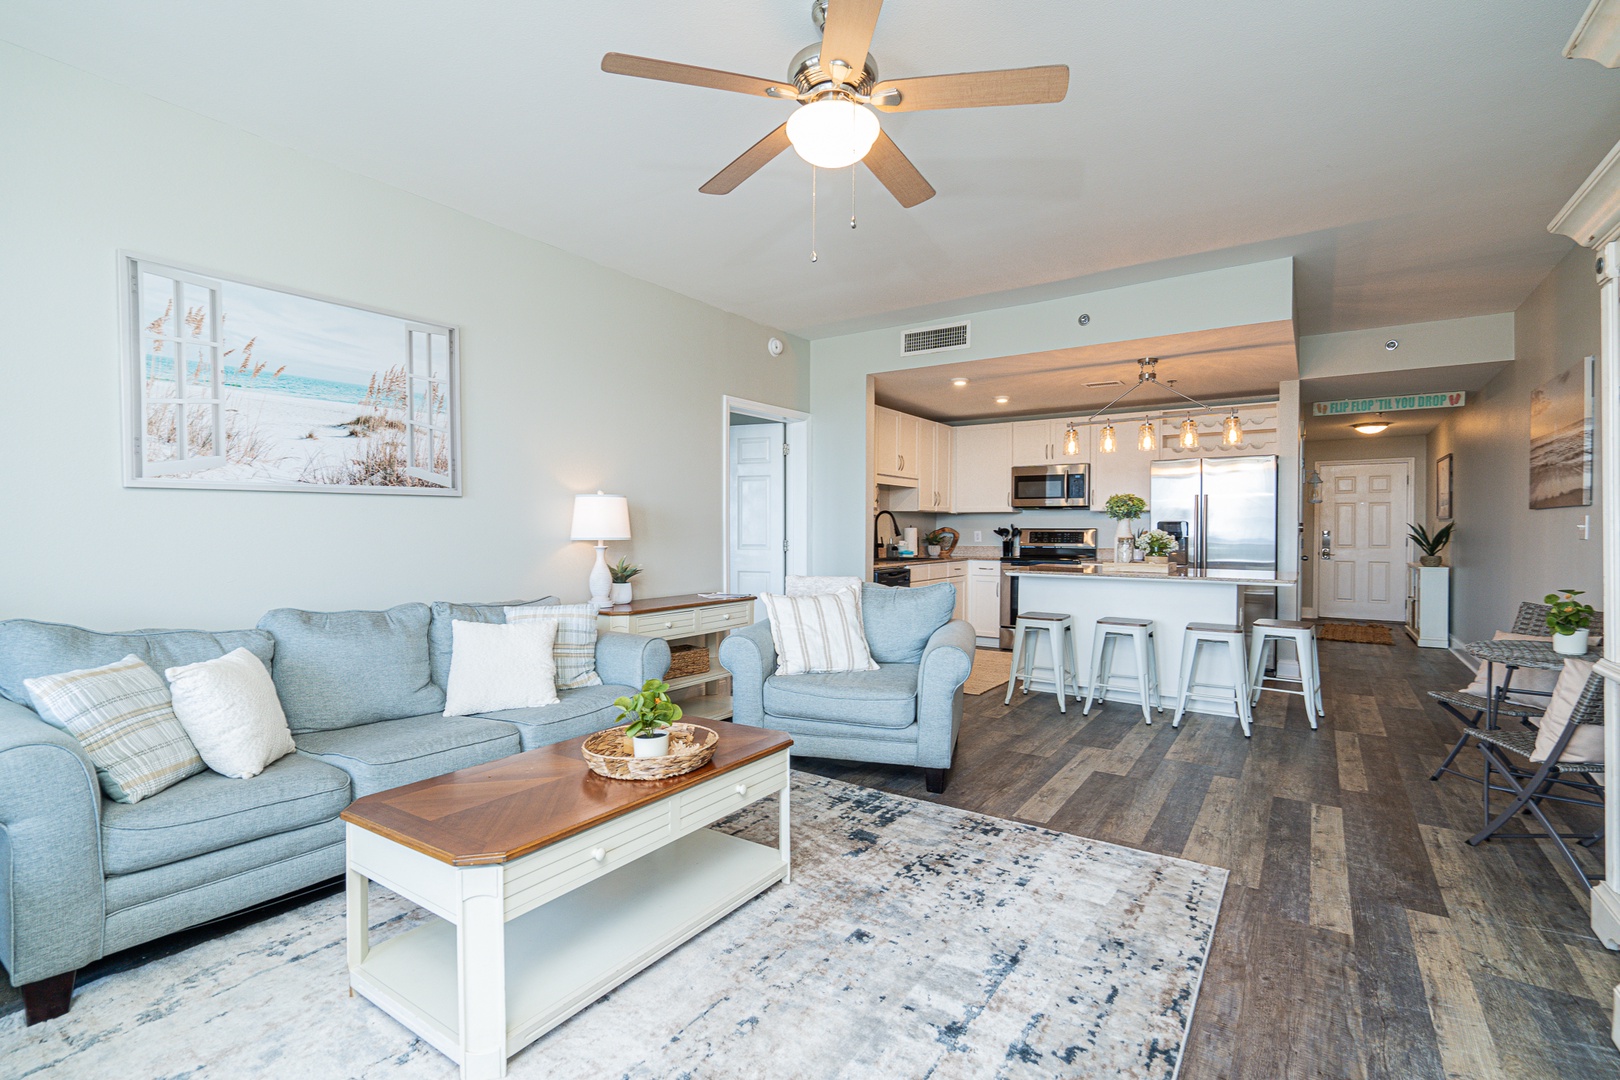 Enjoy the breezy, open layout of the main living spaces